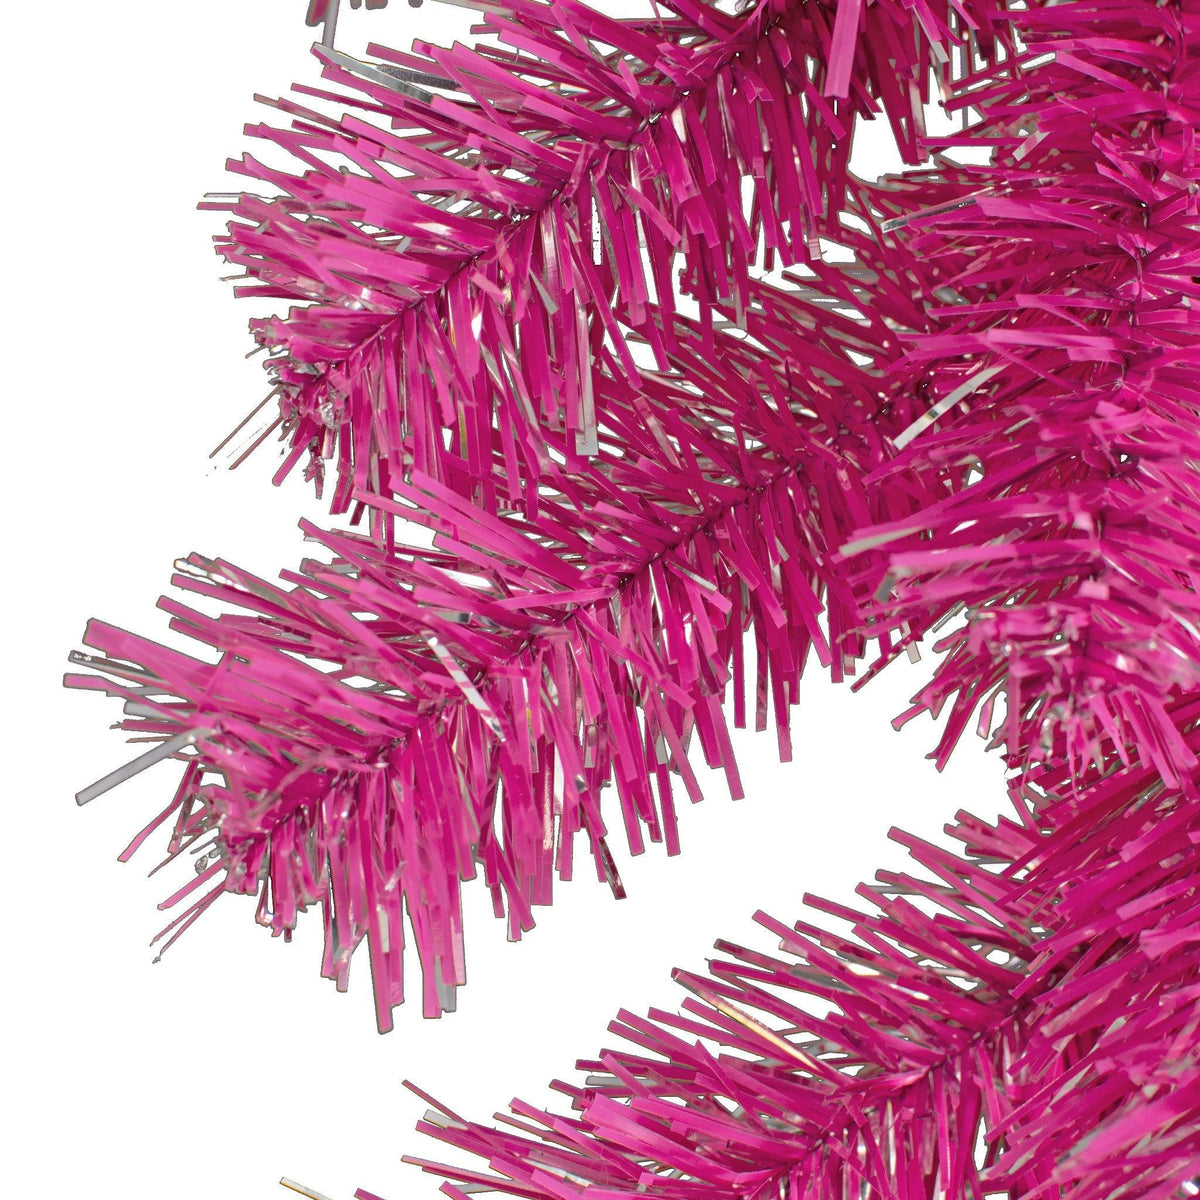   Shop for Lee Display's brand new 6FT Pink and Silver Tinsel Brush Garlands on sale now at leedisplay.com. Upclose photo of the color of the tinsel brush